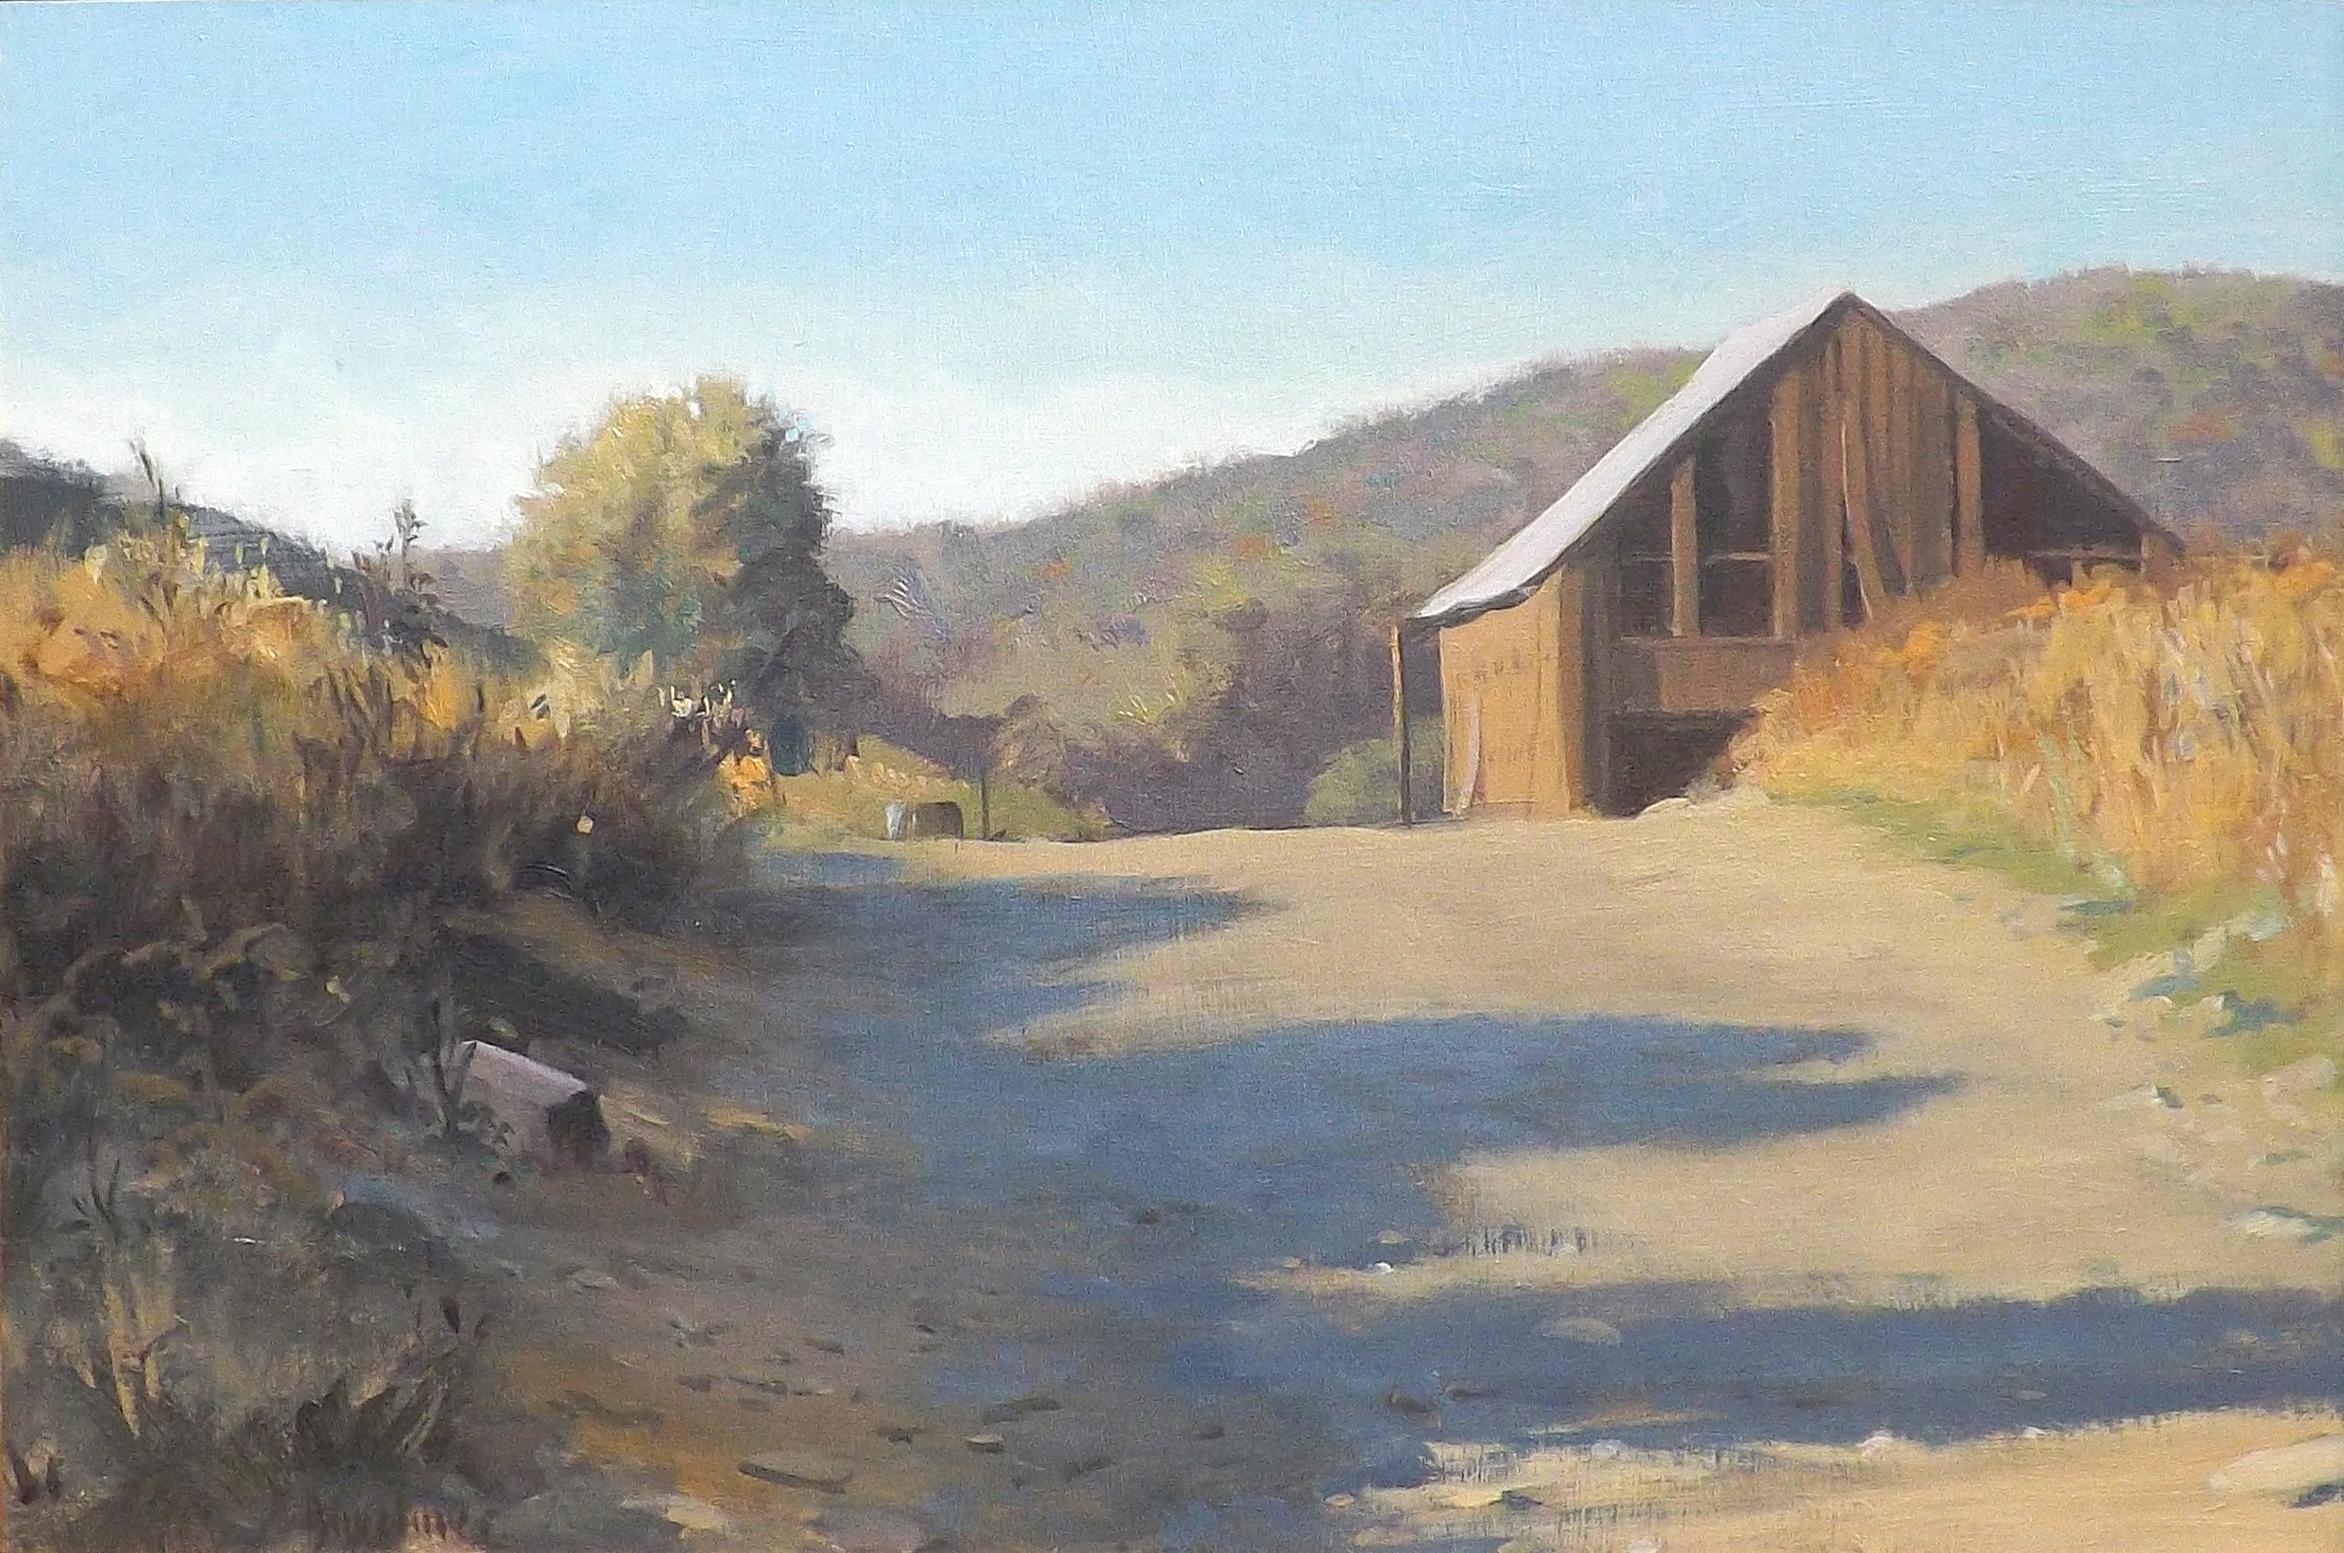 A dilapidated old barn sits on a hill alongside a dirt road covered in late afternoon shadows in this atmospheric painting by New York artist Thomas S. Buechner. Titled 'Bottcher's Tobacco Barn Corning New York' on the back.

Thomas Scharman